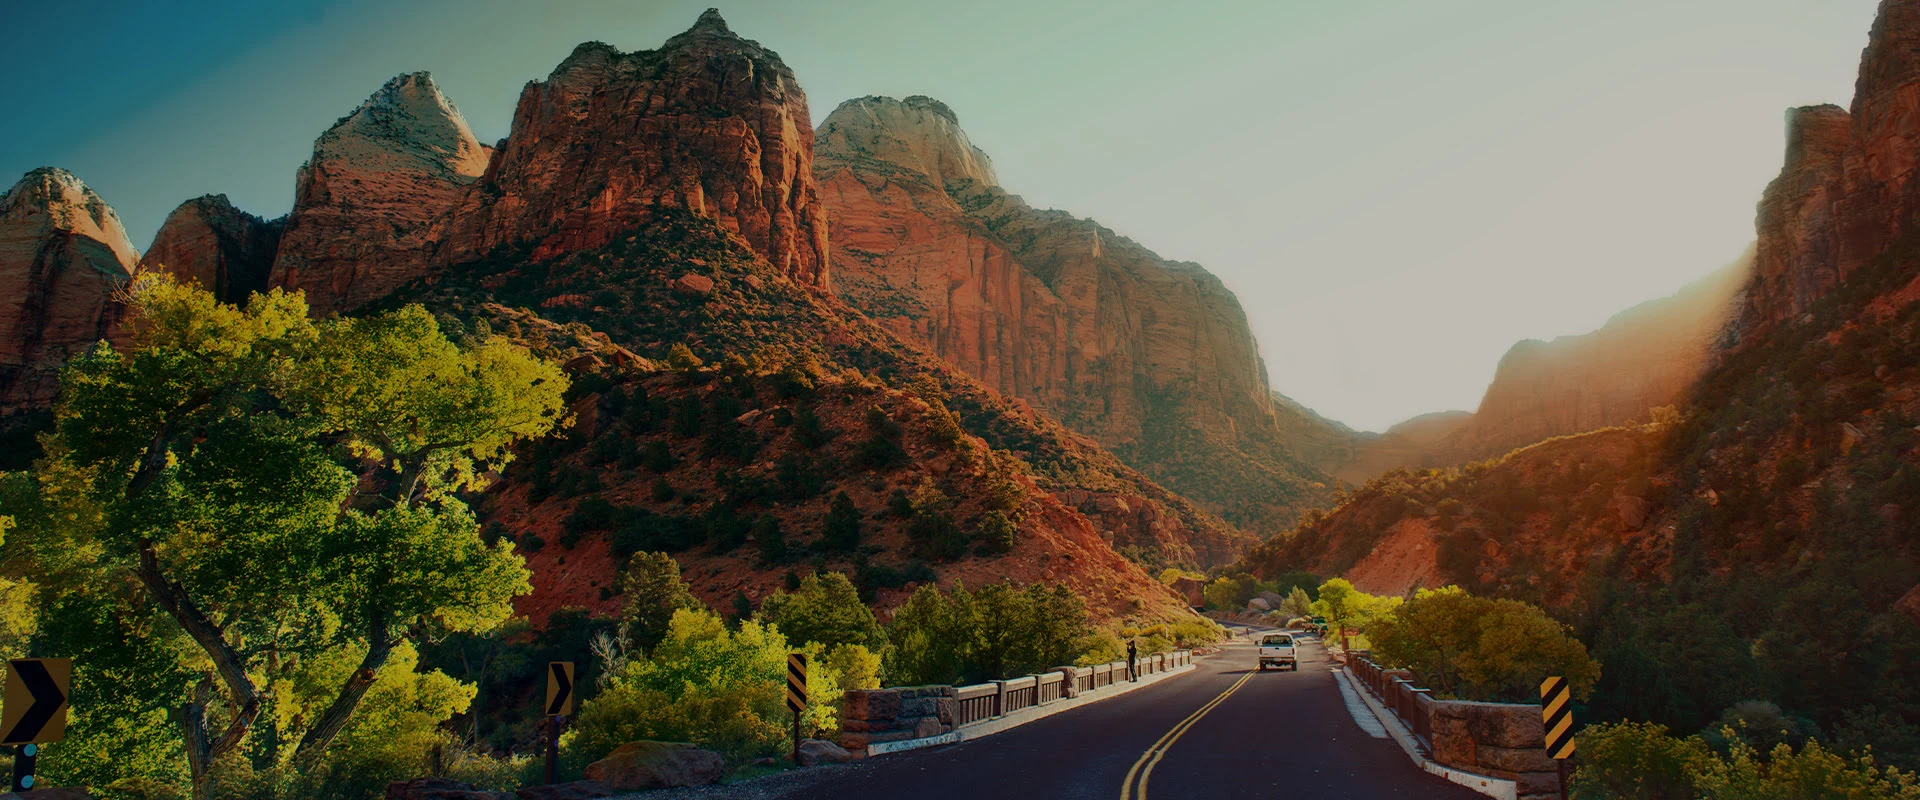 Road through zions canyons